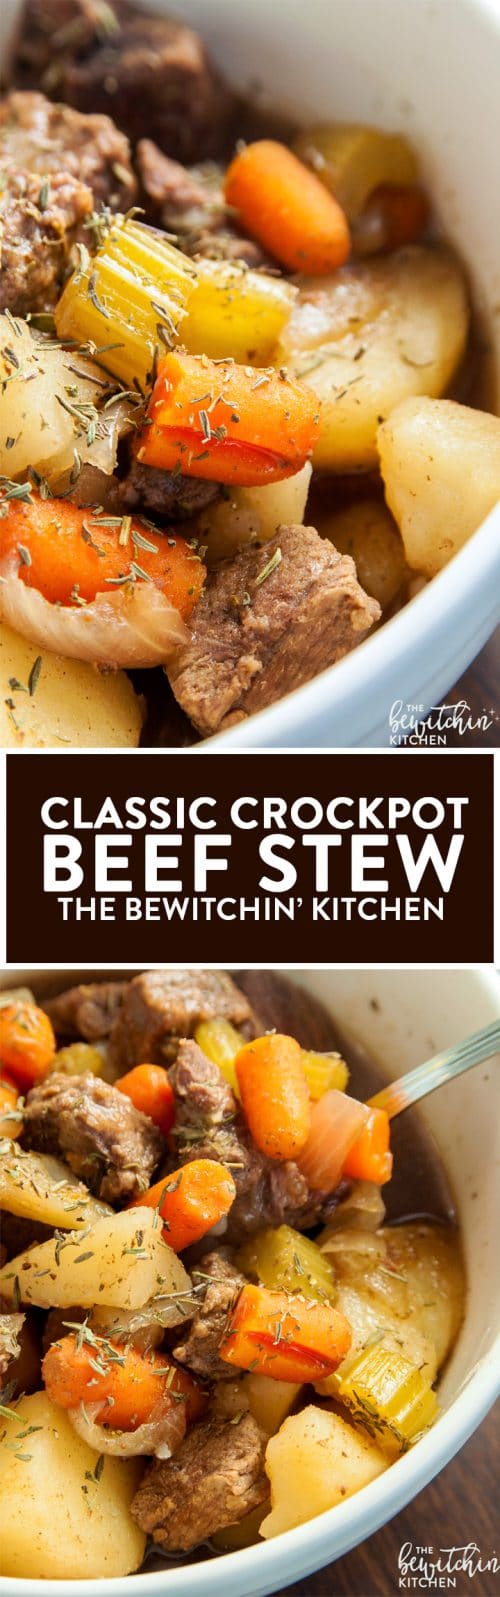 Close up shots of beef stew